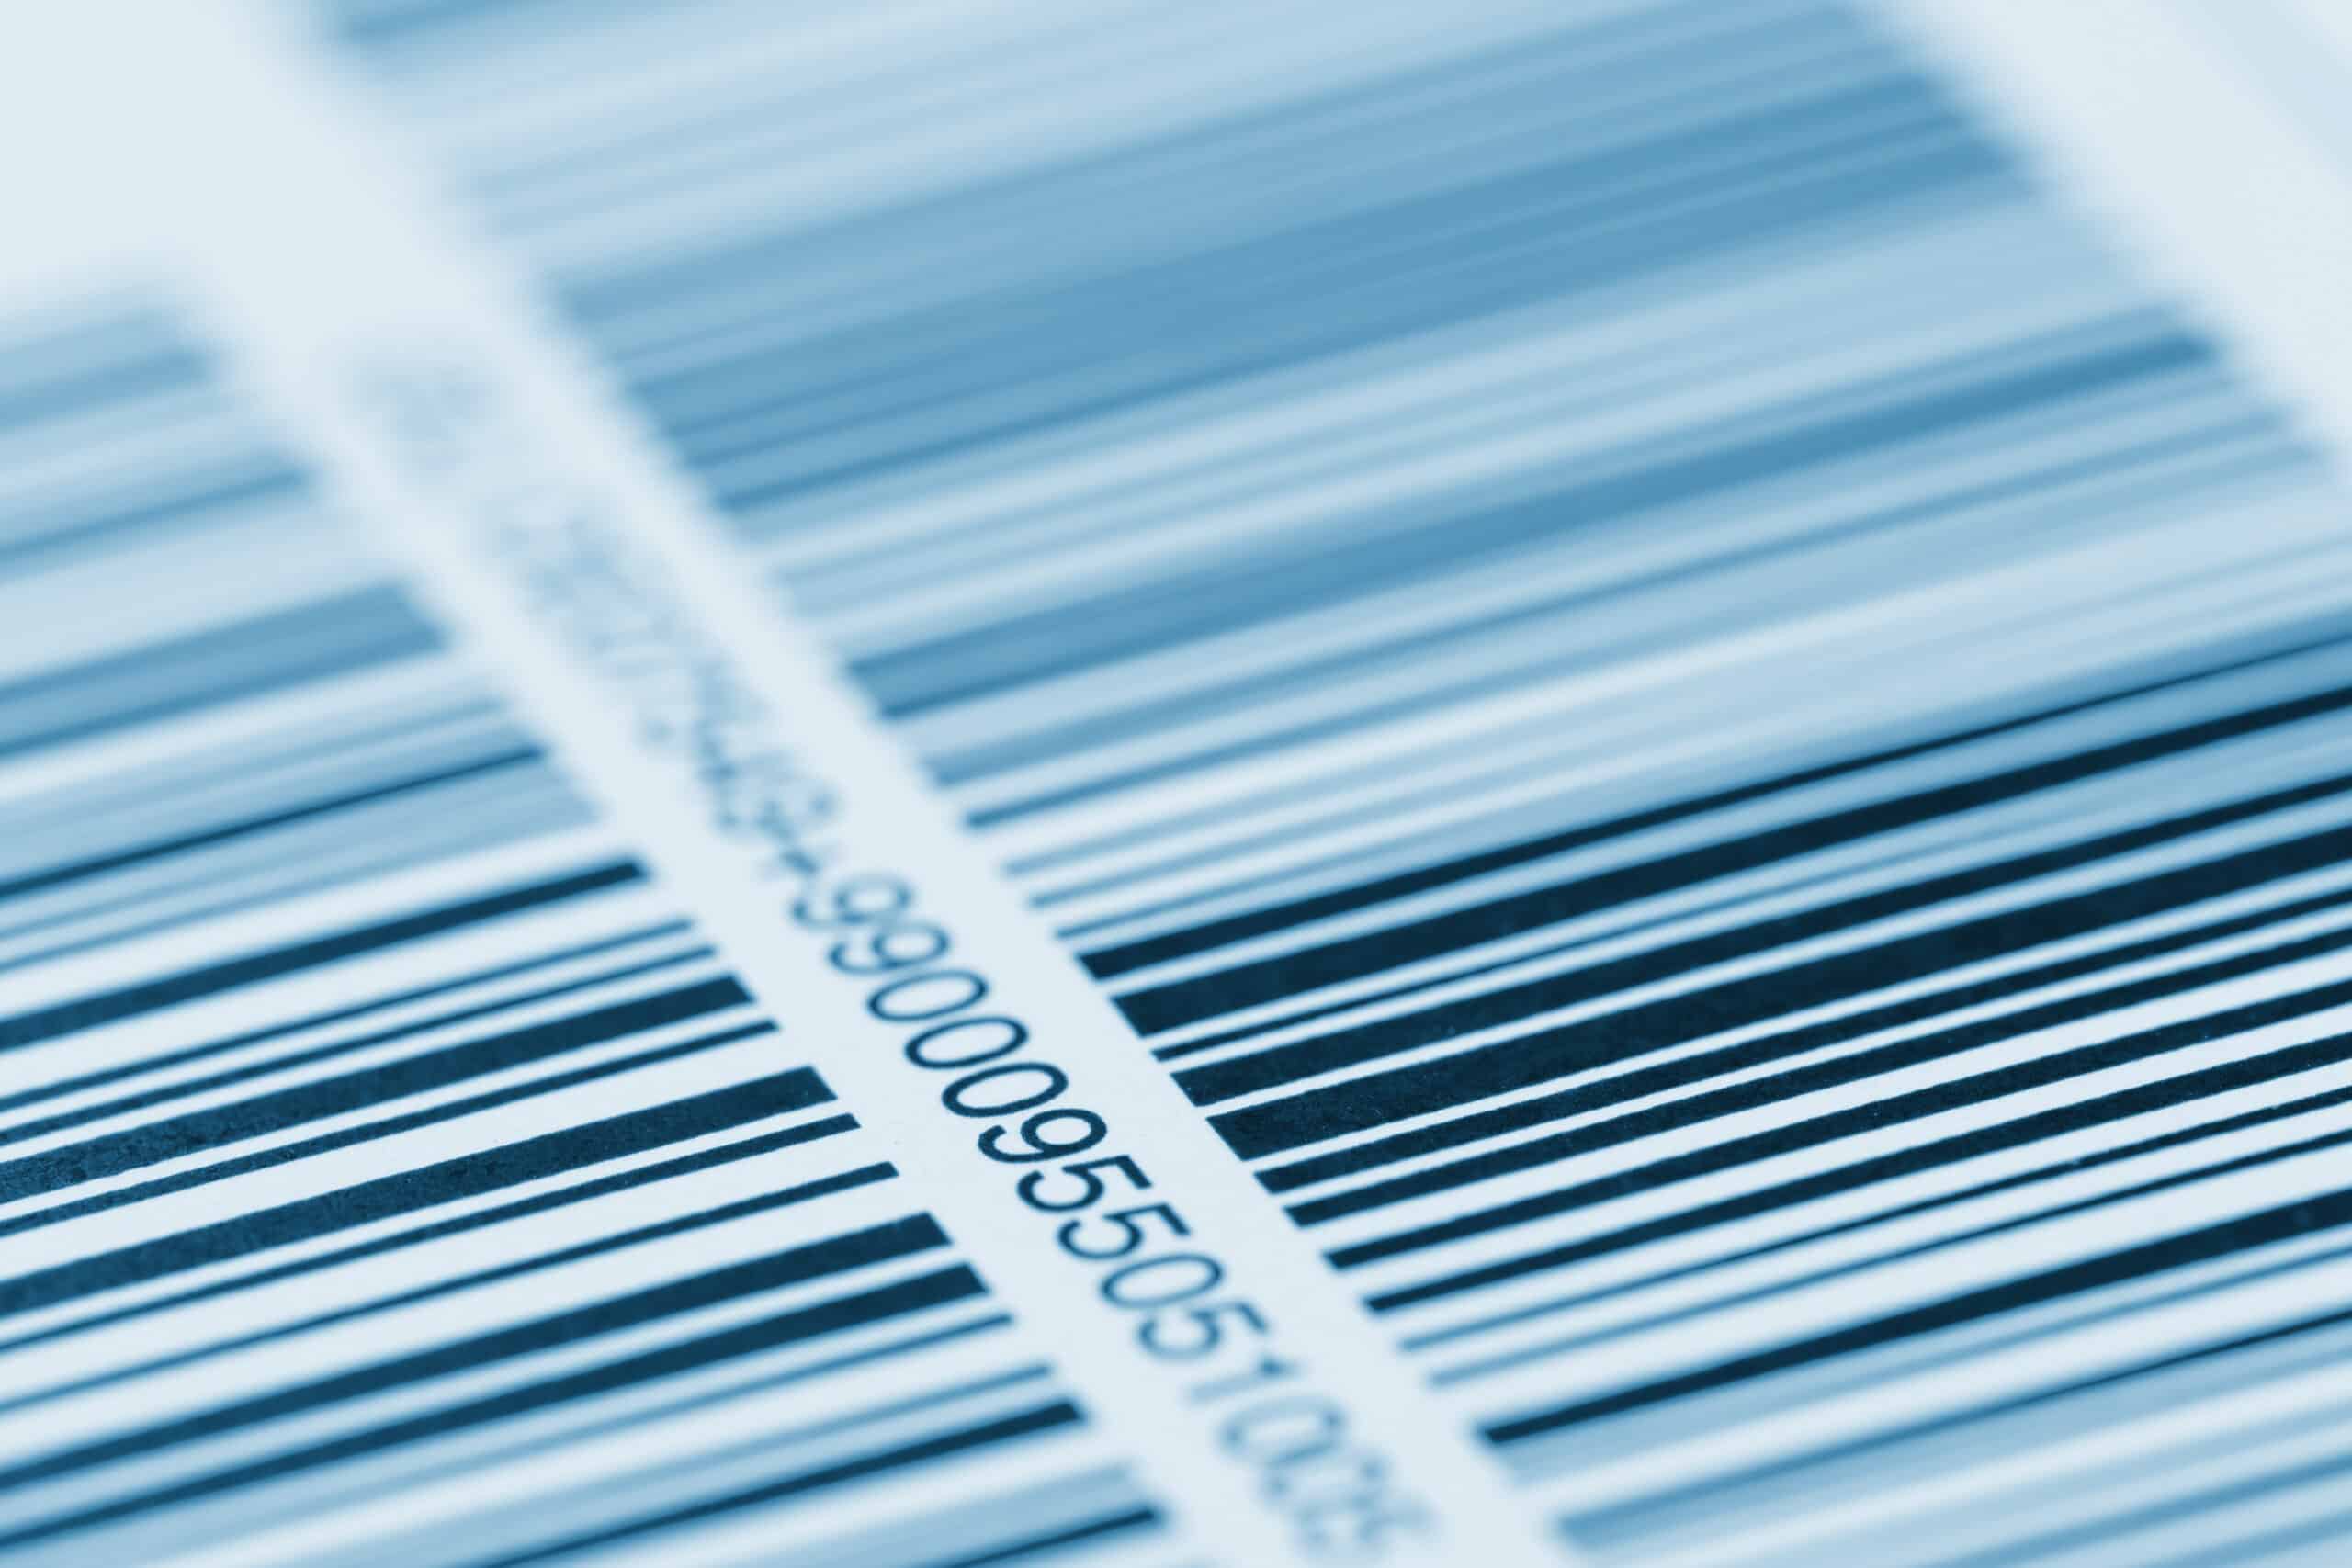 Barcode- Enhance Your Operations and Save Time with RFID Technology